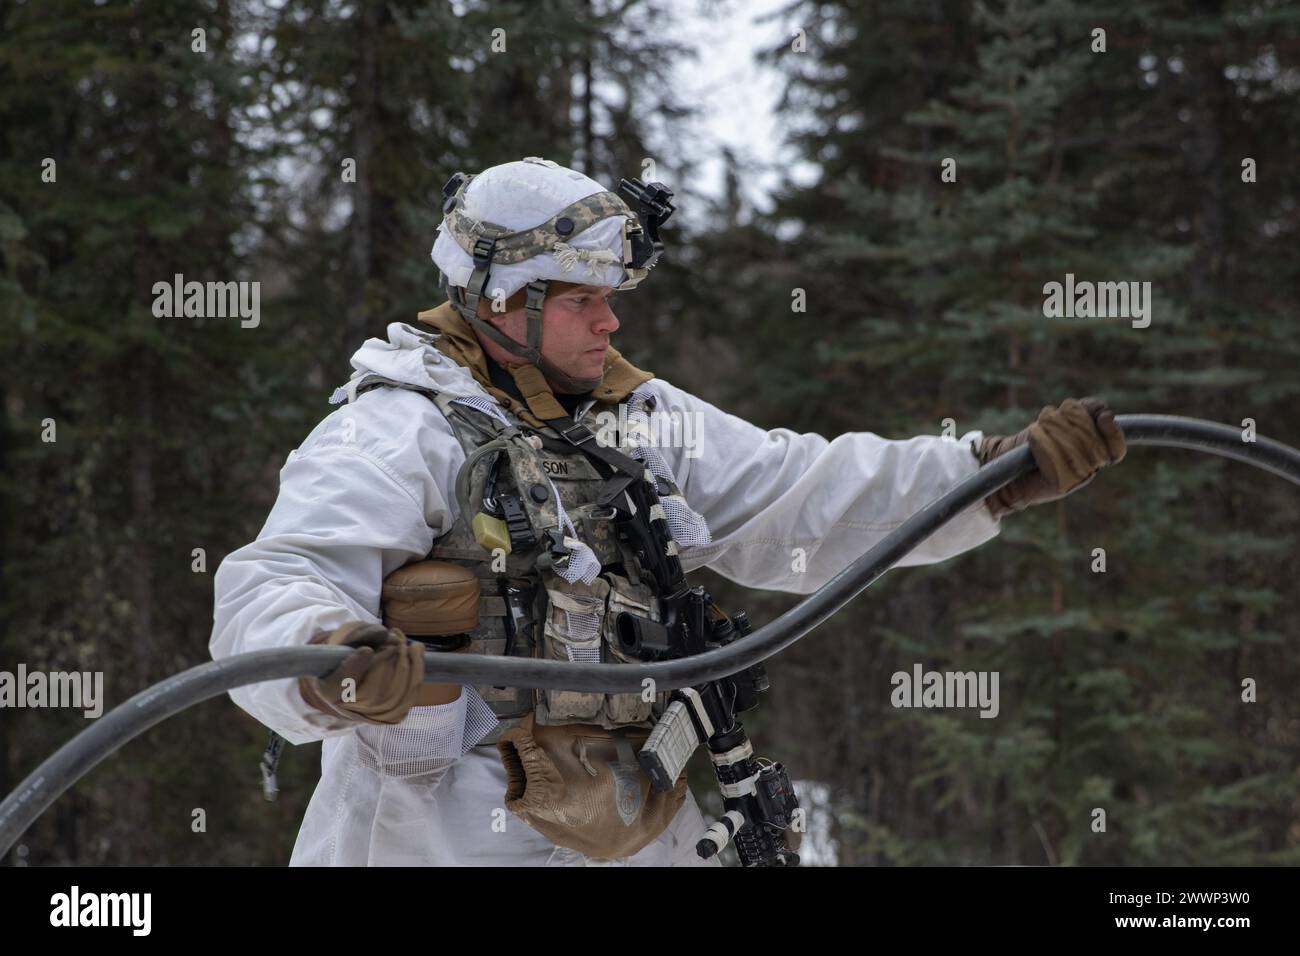 A U.S. Soldier, assigned to 1st Battalion, 24th Infantry Regiment, 1st Infantry Brigade Combat Team, 11th Airborne Division, helps set up electricity for communication during Joint Pacific Multinational Readiness Center 24-02 at Donnelly Training Area, Alaska, Feb. 19, 2024. JPMRC 24-02, executed in Alaska with its world-class training facilities and its harsh Arctic environment, builds Soldiers and leaders into a cohesive team of skilled, tough, alert, and adaptive warriors capable of fighting and winning anywhere in the world.  Army Stock Photo